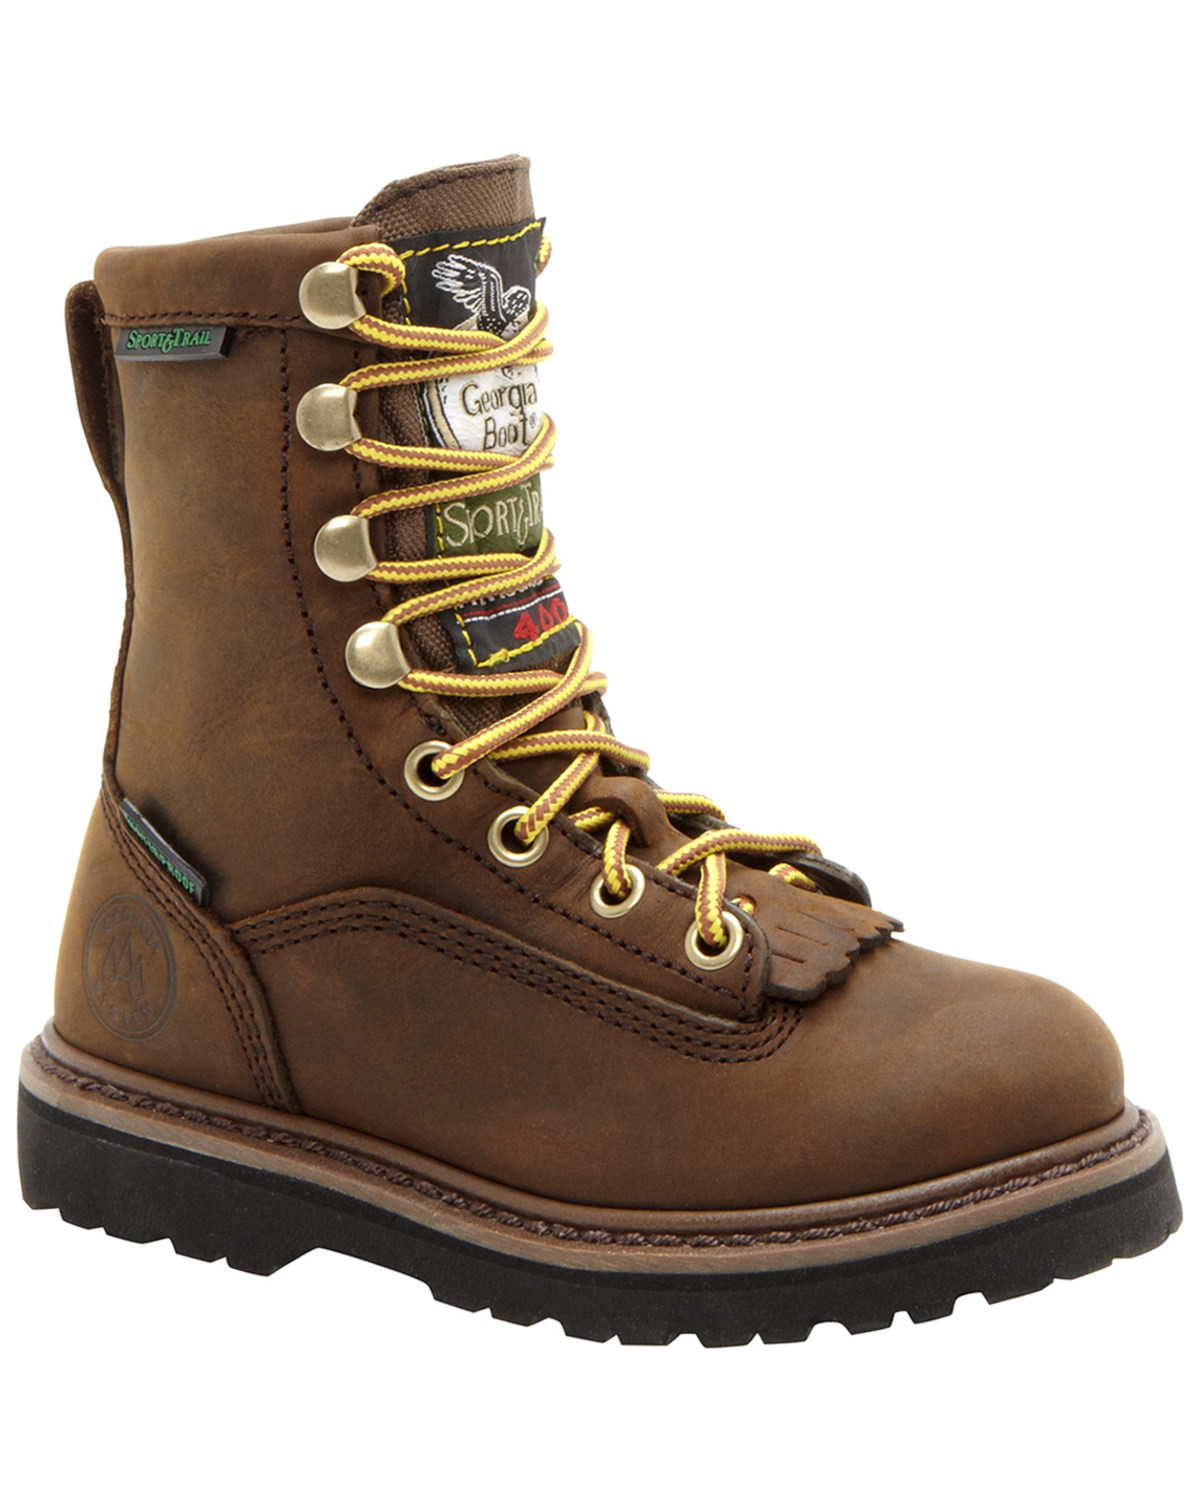 Georgia Boot Boys' Insulated Outdoor Waterproof Lace-Up Boots